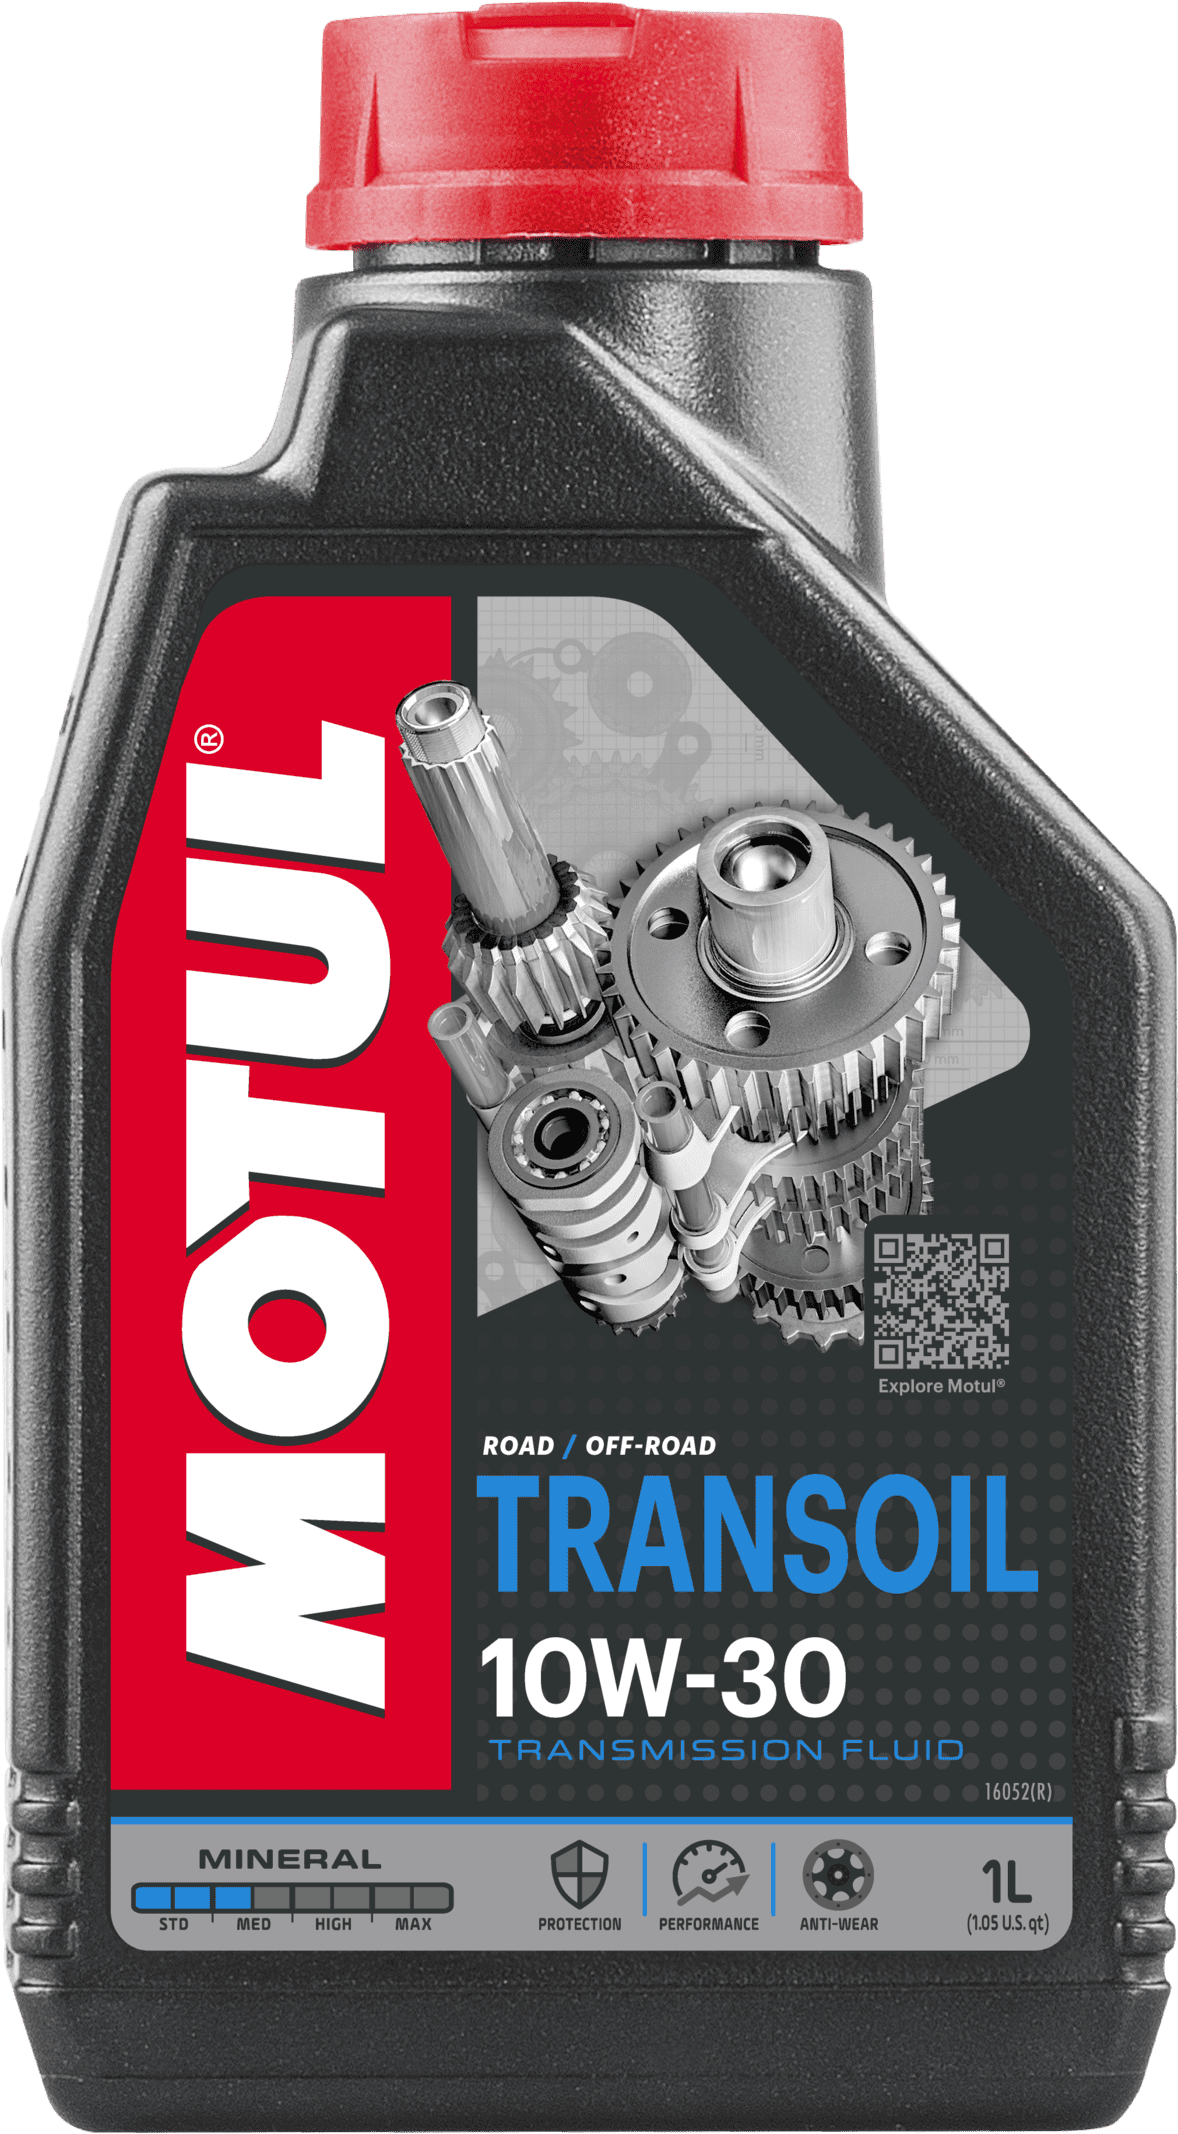 105894-1 Mineral lubricant designed for gearboxes with wet clutch using a different oil from engine oil: gearbox case separated from engine crankcase.